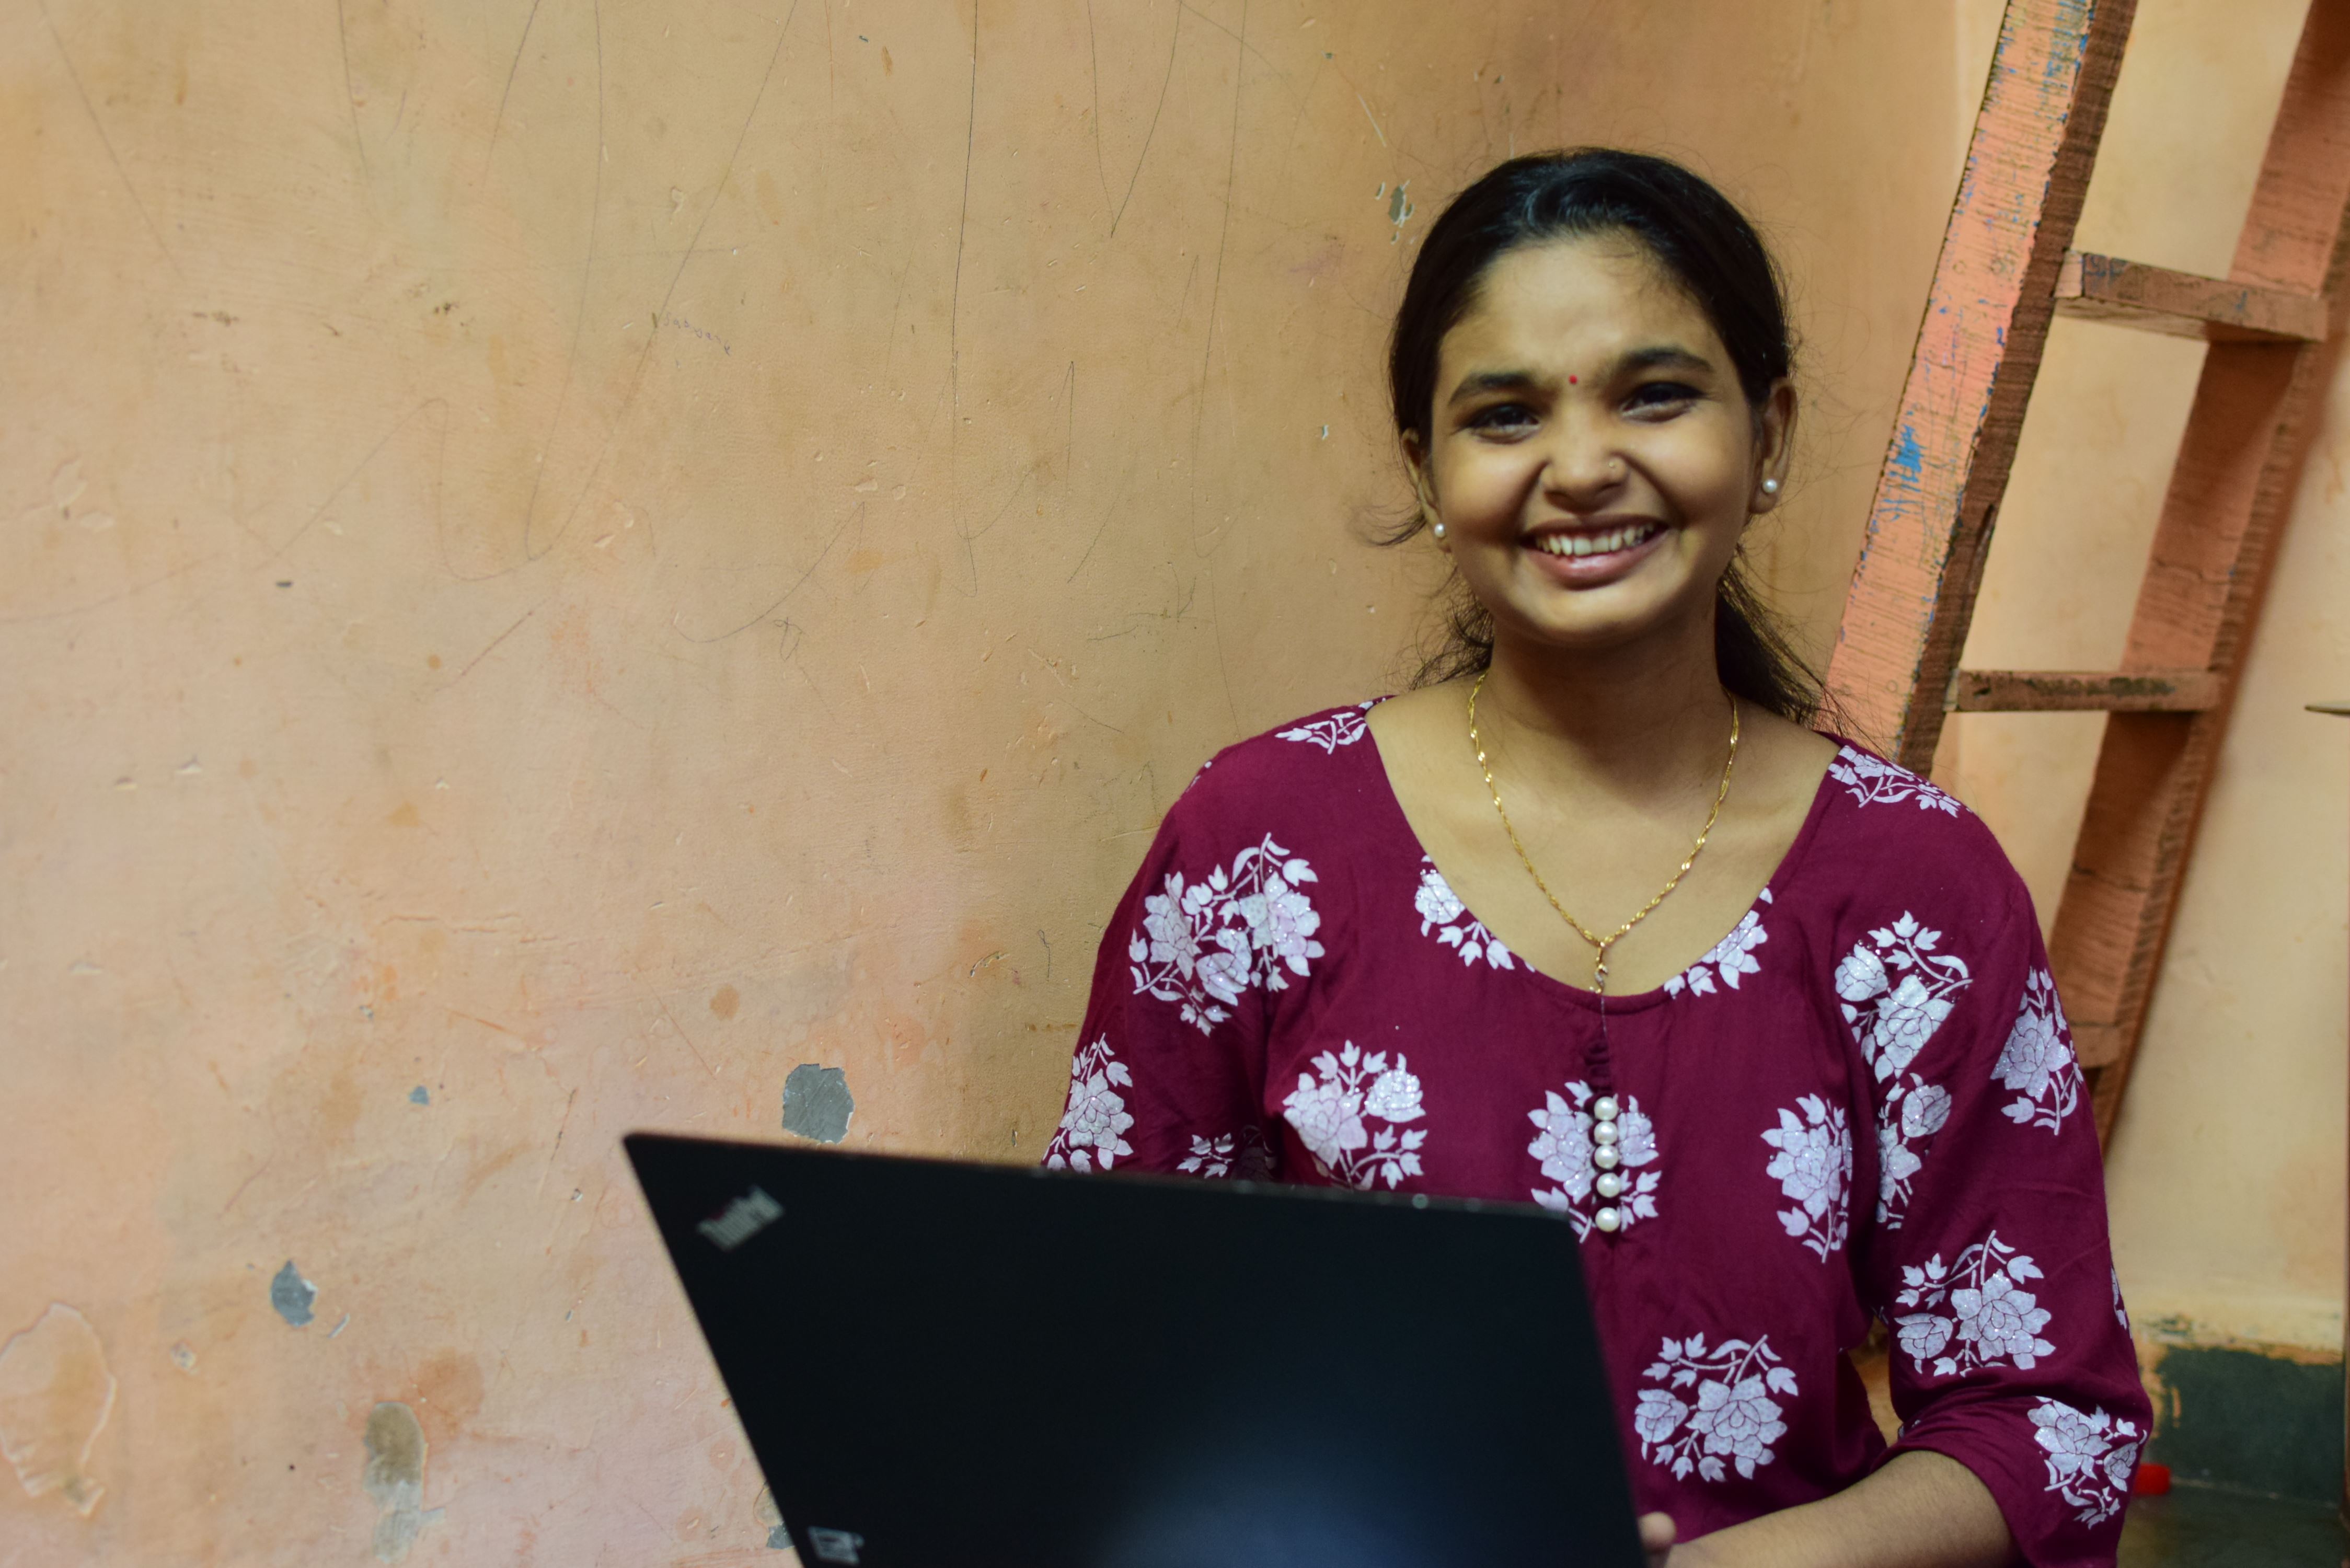 Previously sponsored girl by World Vision smiling and looking at the camera in her home in India while working on her laptop